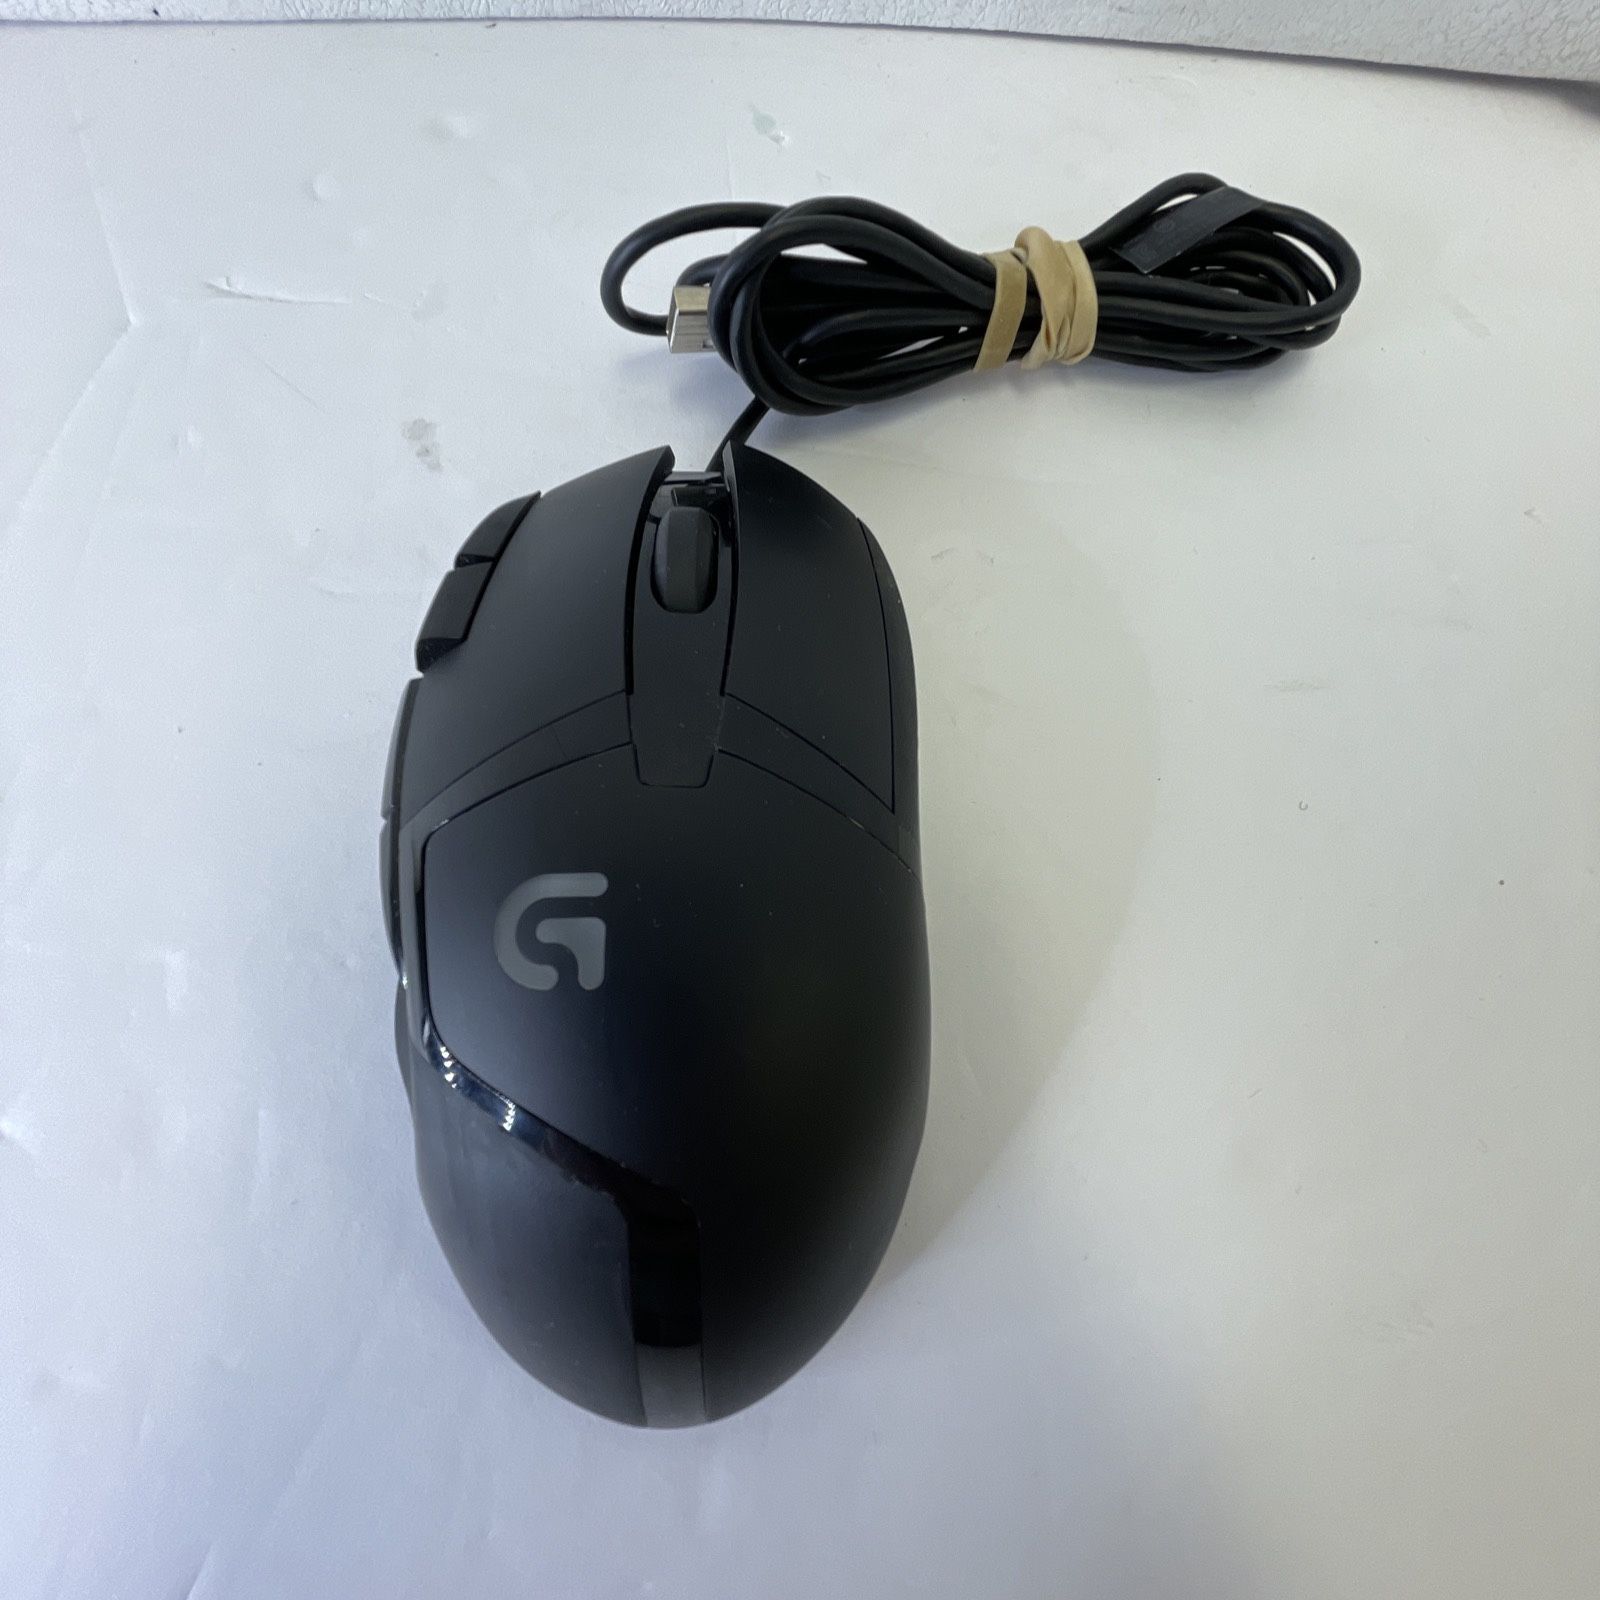 Logitech G402 Hyperion Fury Optical Gaming Mouse - Black - Tested